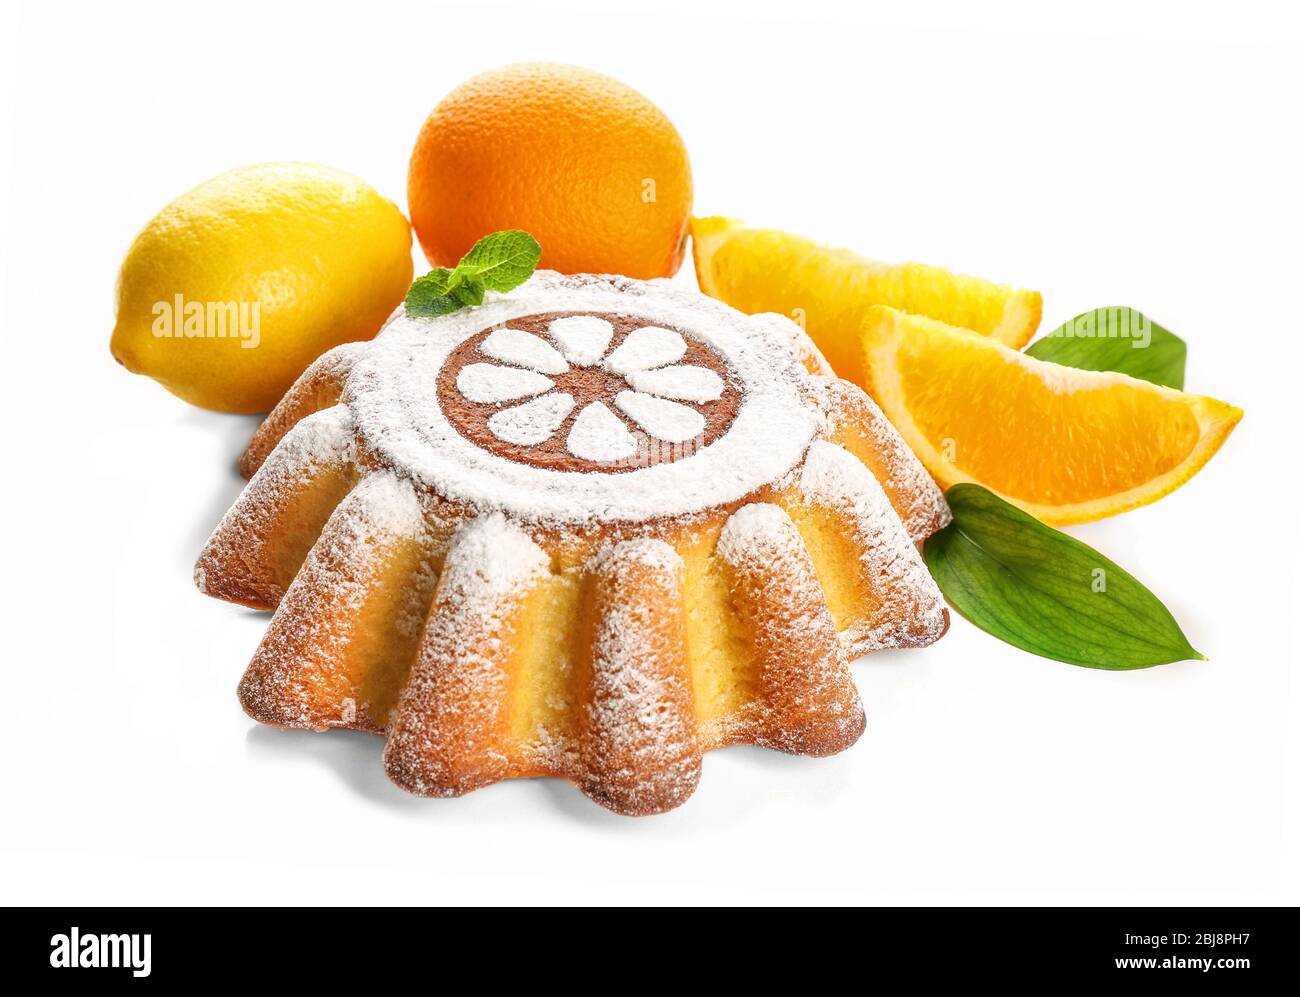 Delicious citrus cake with lemons and oranges on white background Stock Photo